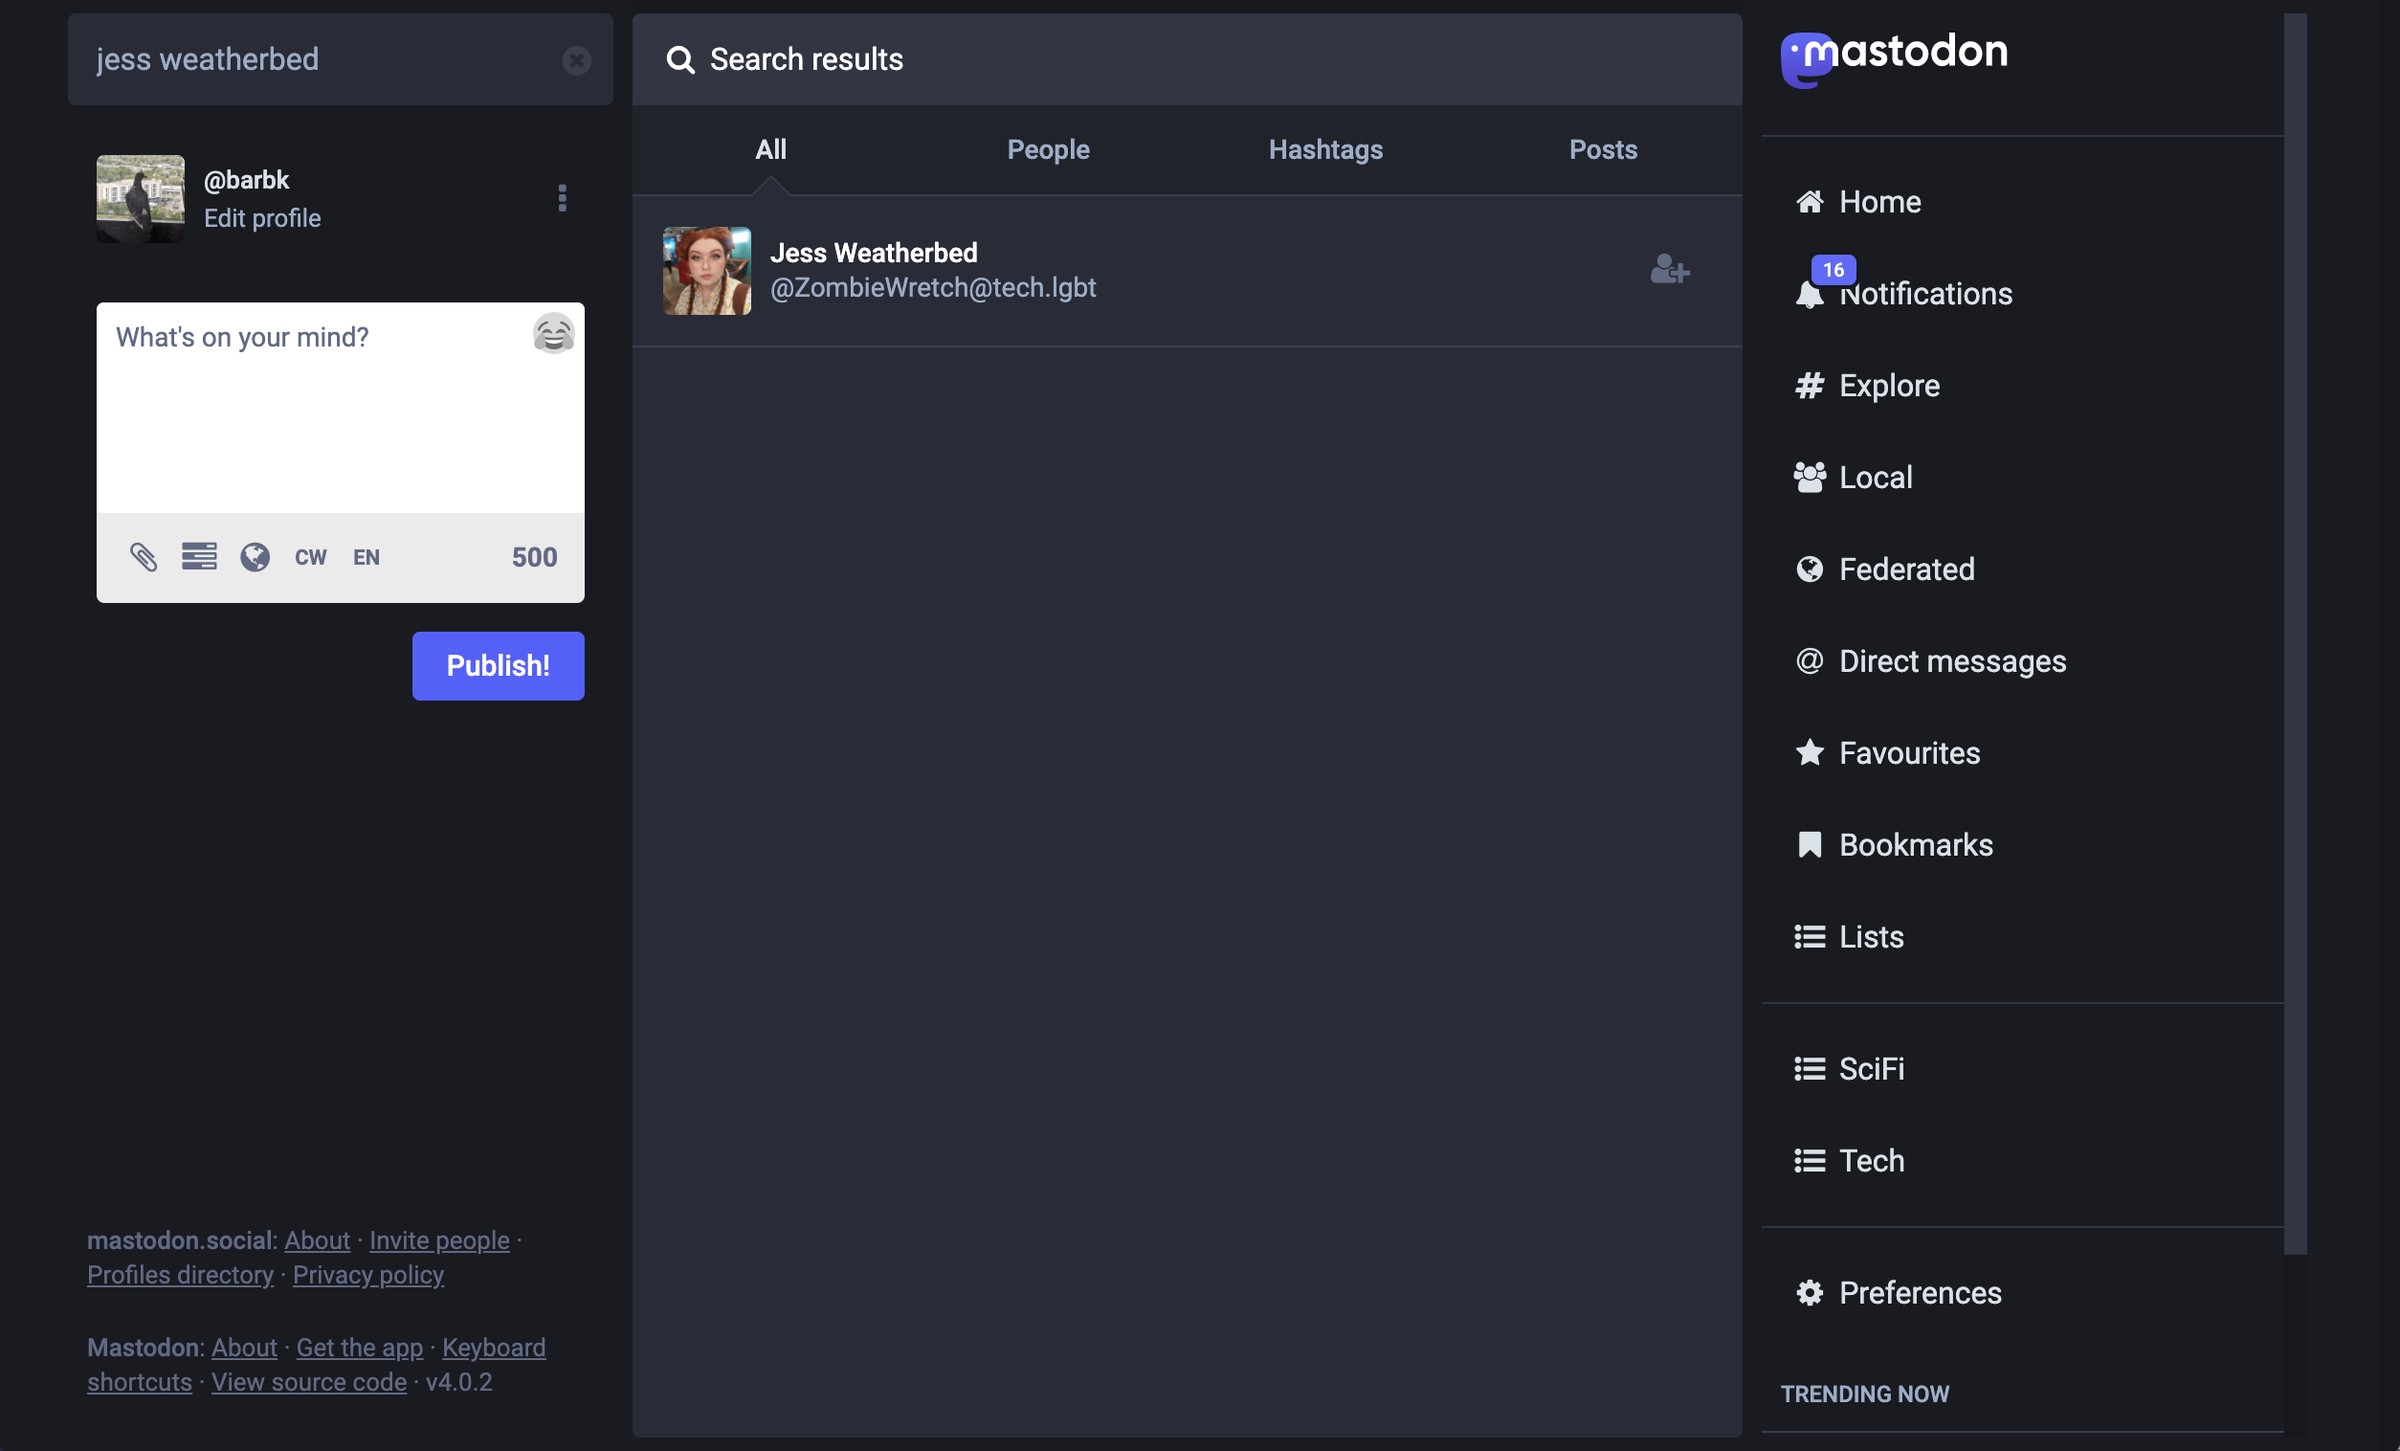 A Mastodon page with a name in the search box, the same name with an icon and a Mastodon address in the center, and the Mastodon menu on the right.